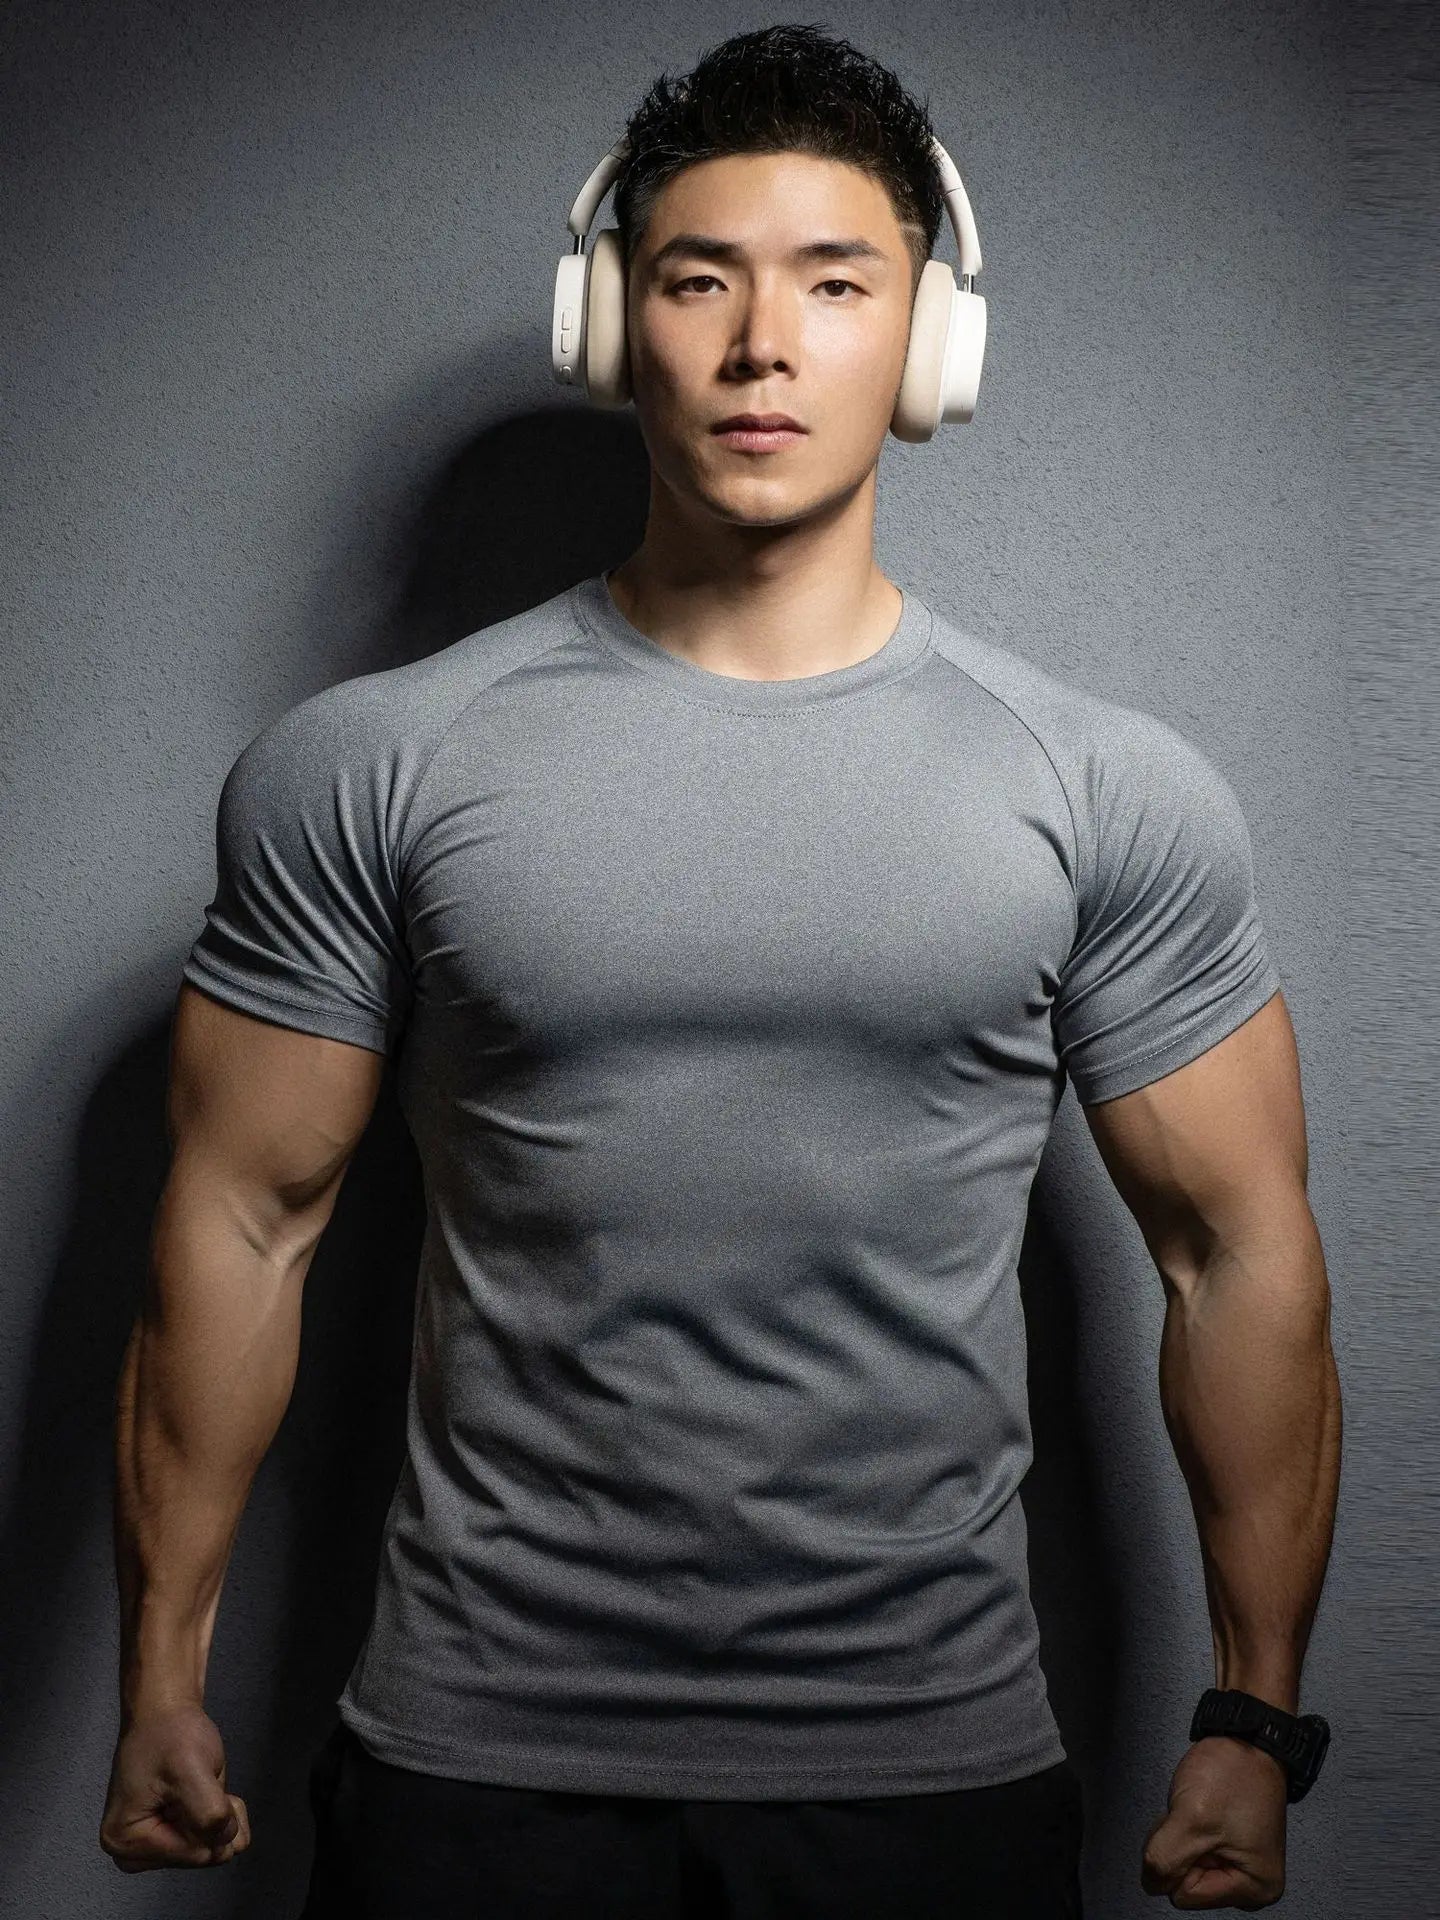  Stretchy quick drying short sleeve T-shirt for Men grey front view 